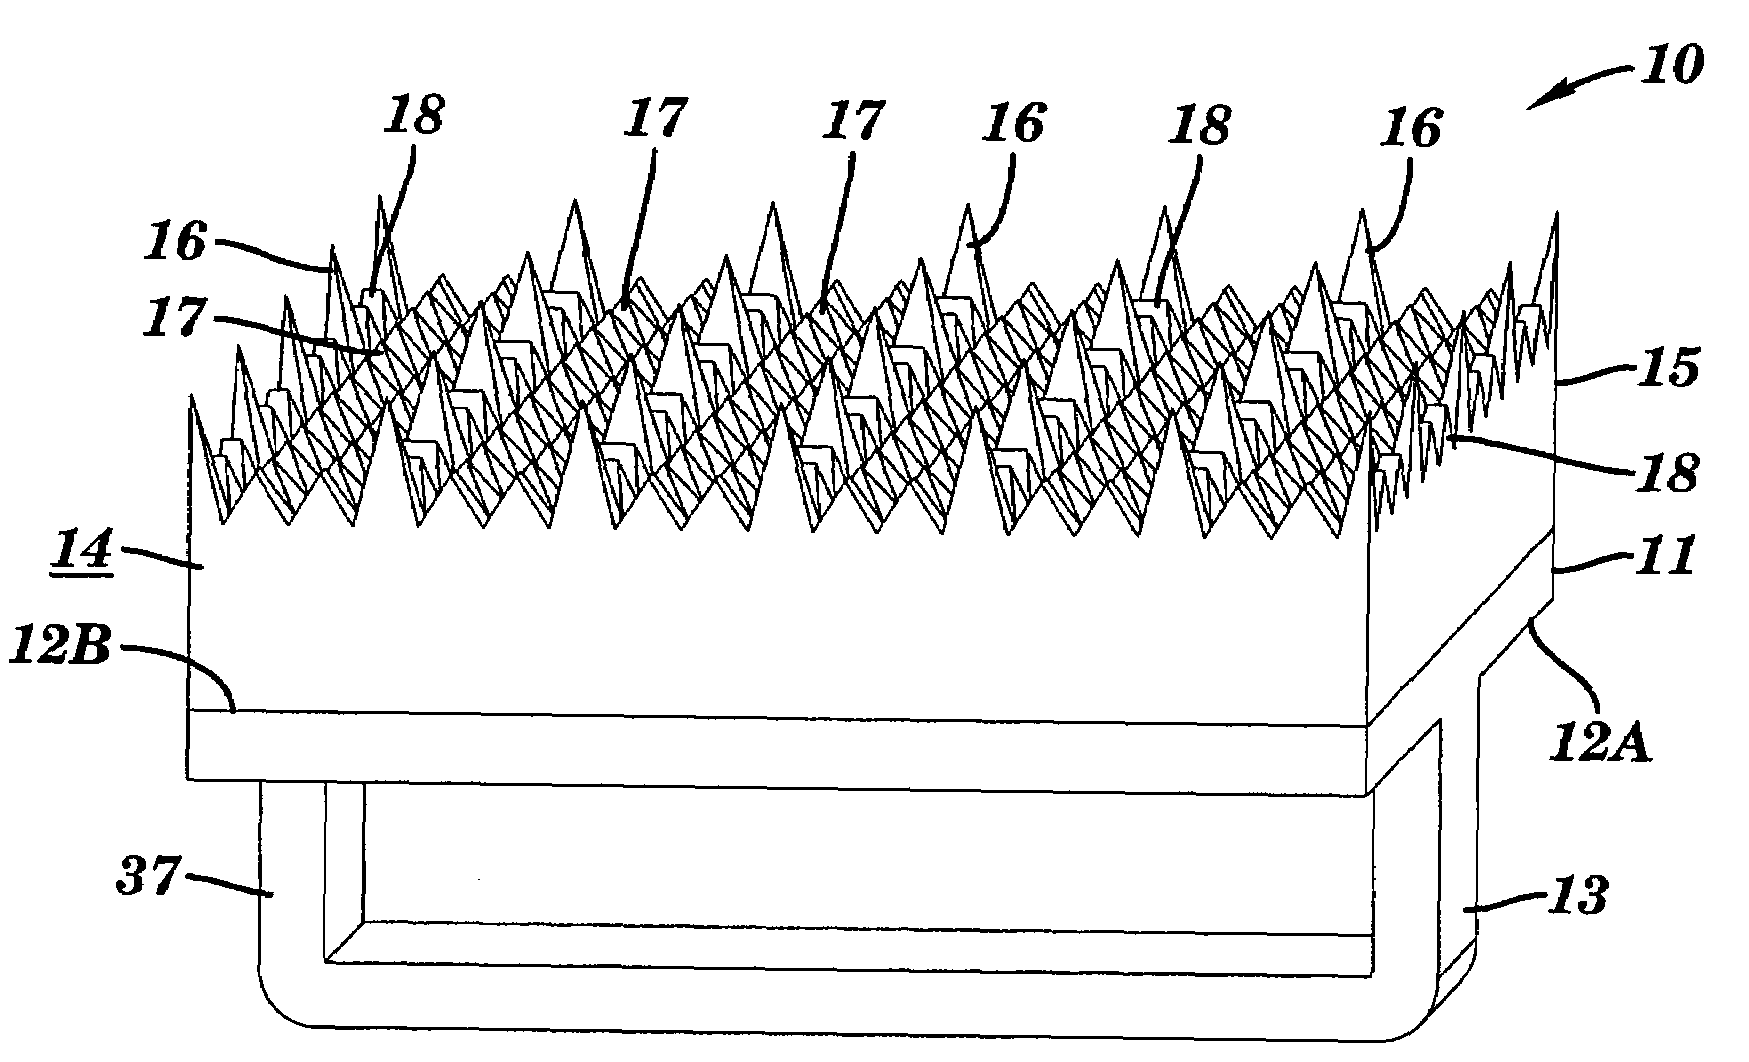 Article and method for cleaning uneven, variable geometry surfaces of electronic devices, internal electronic assemblies, or the like